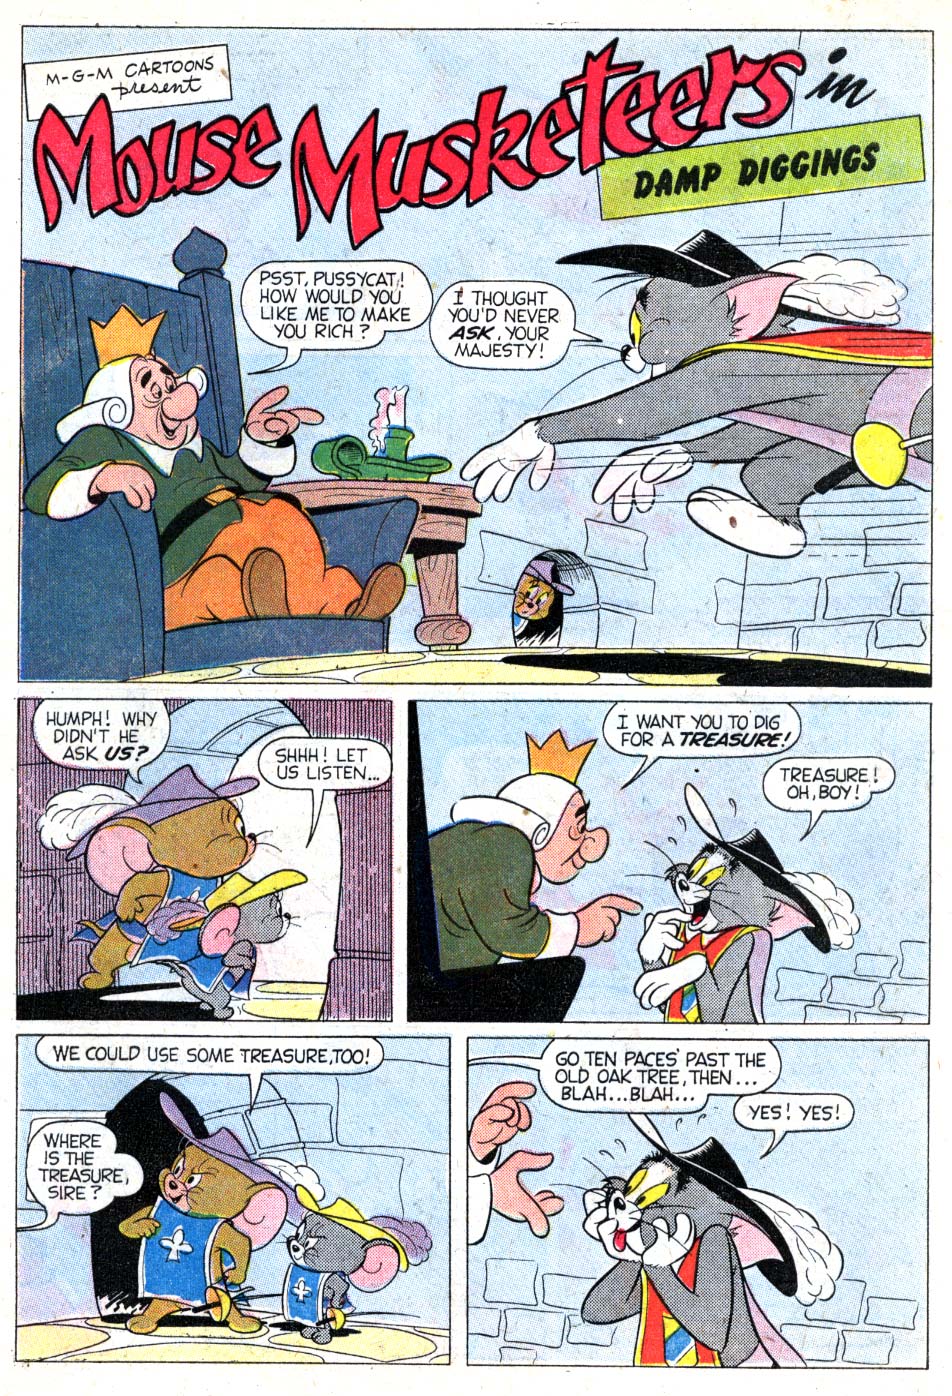 Read online M.G.M's The Mouse Musketeers comic -  Issue #12 - 27